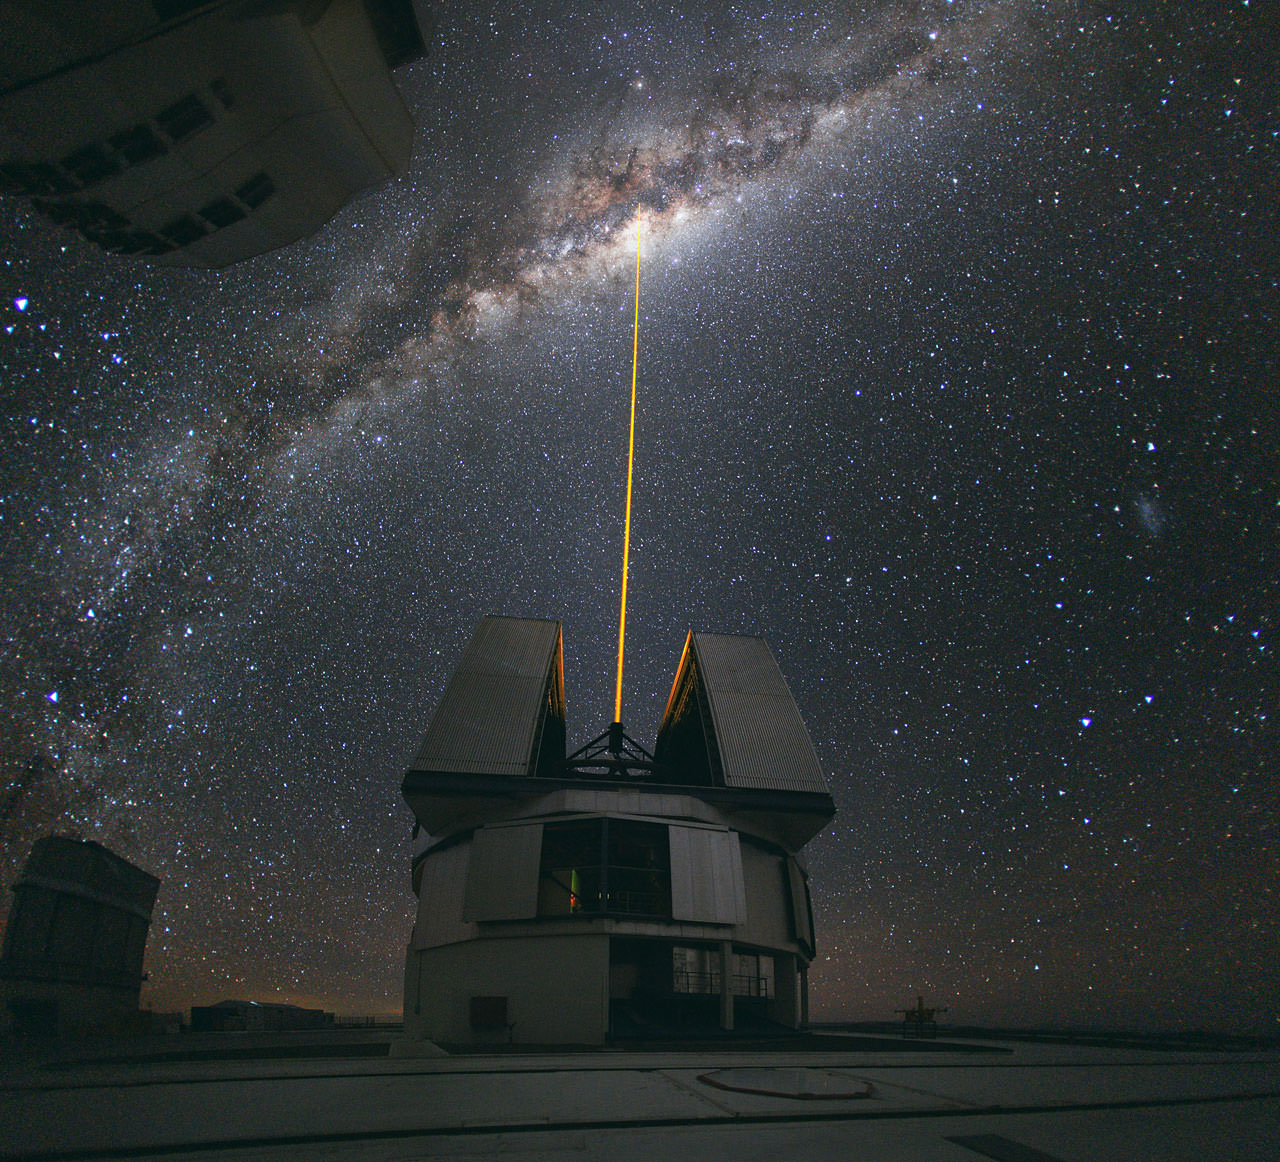 Lasers like this one, at the VLT in Paranal, help counteract the blurring effect of the atmosphere. Powerful arrays of much larger lasers could hide our presence from aliens. (ESO/Y. Beletsky)